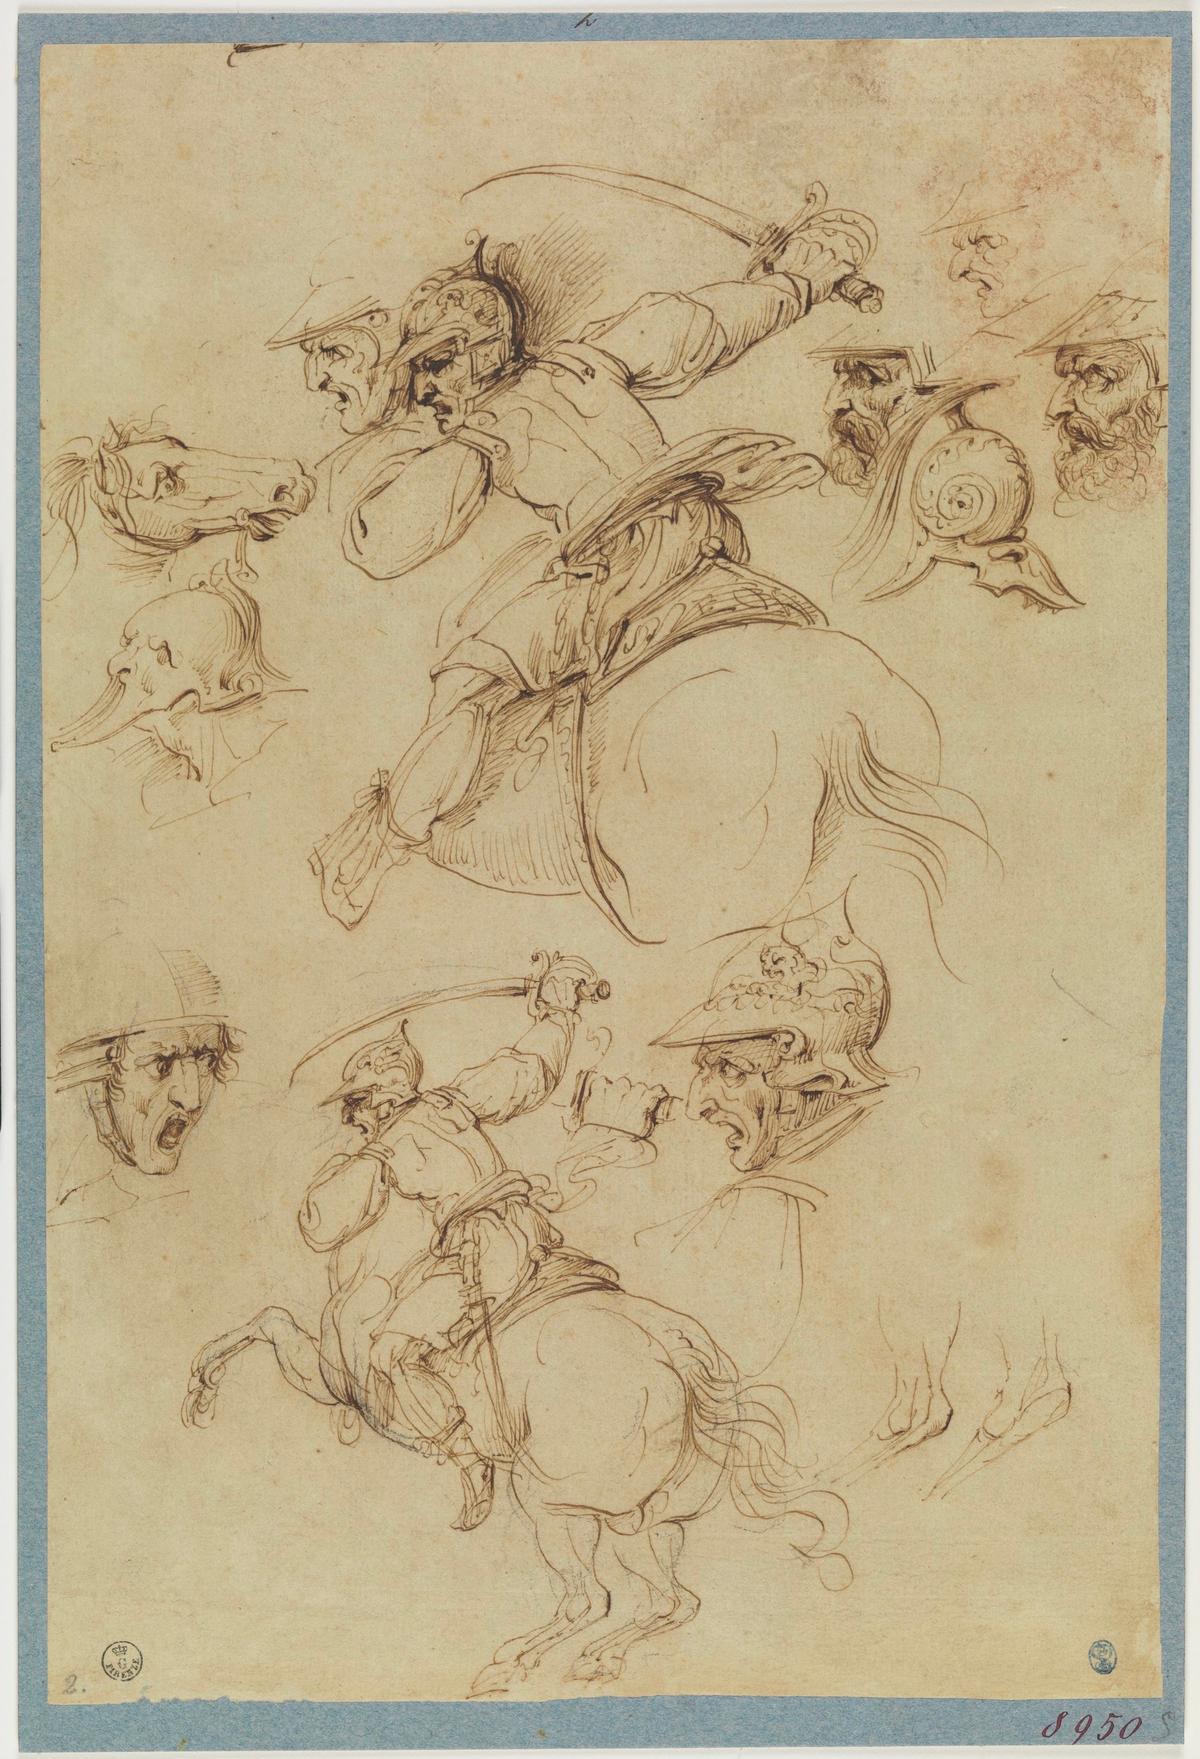 Studies for "The Battle of Anghiari," between 1503 and 1504, by Leonardo da Vinci. Pen and ink on paper. Uffizi Galleries, Florence. (Public Domain)